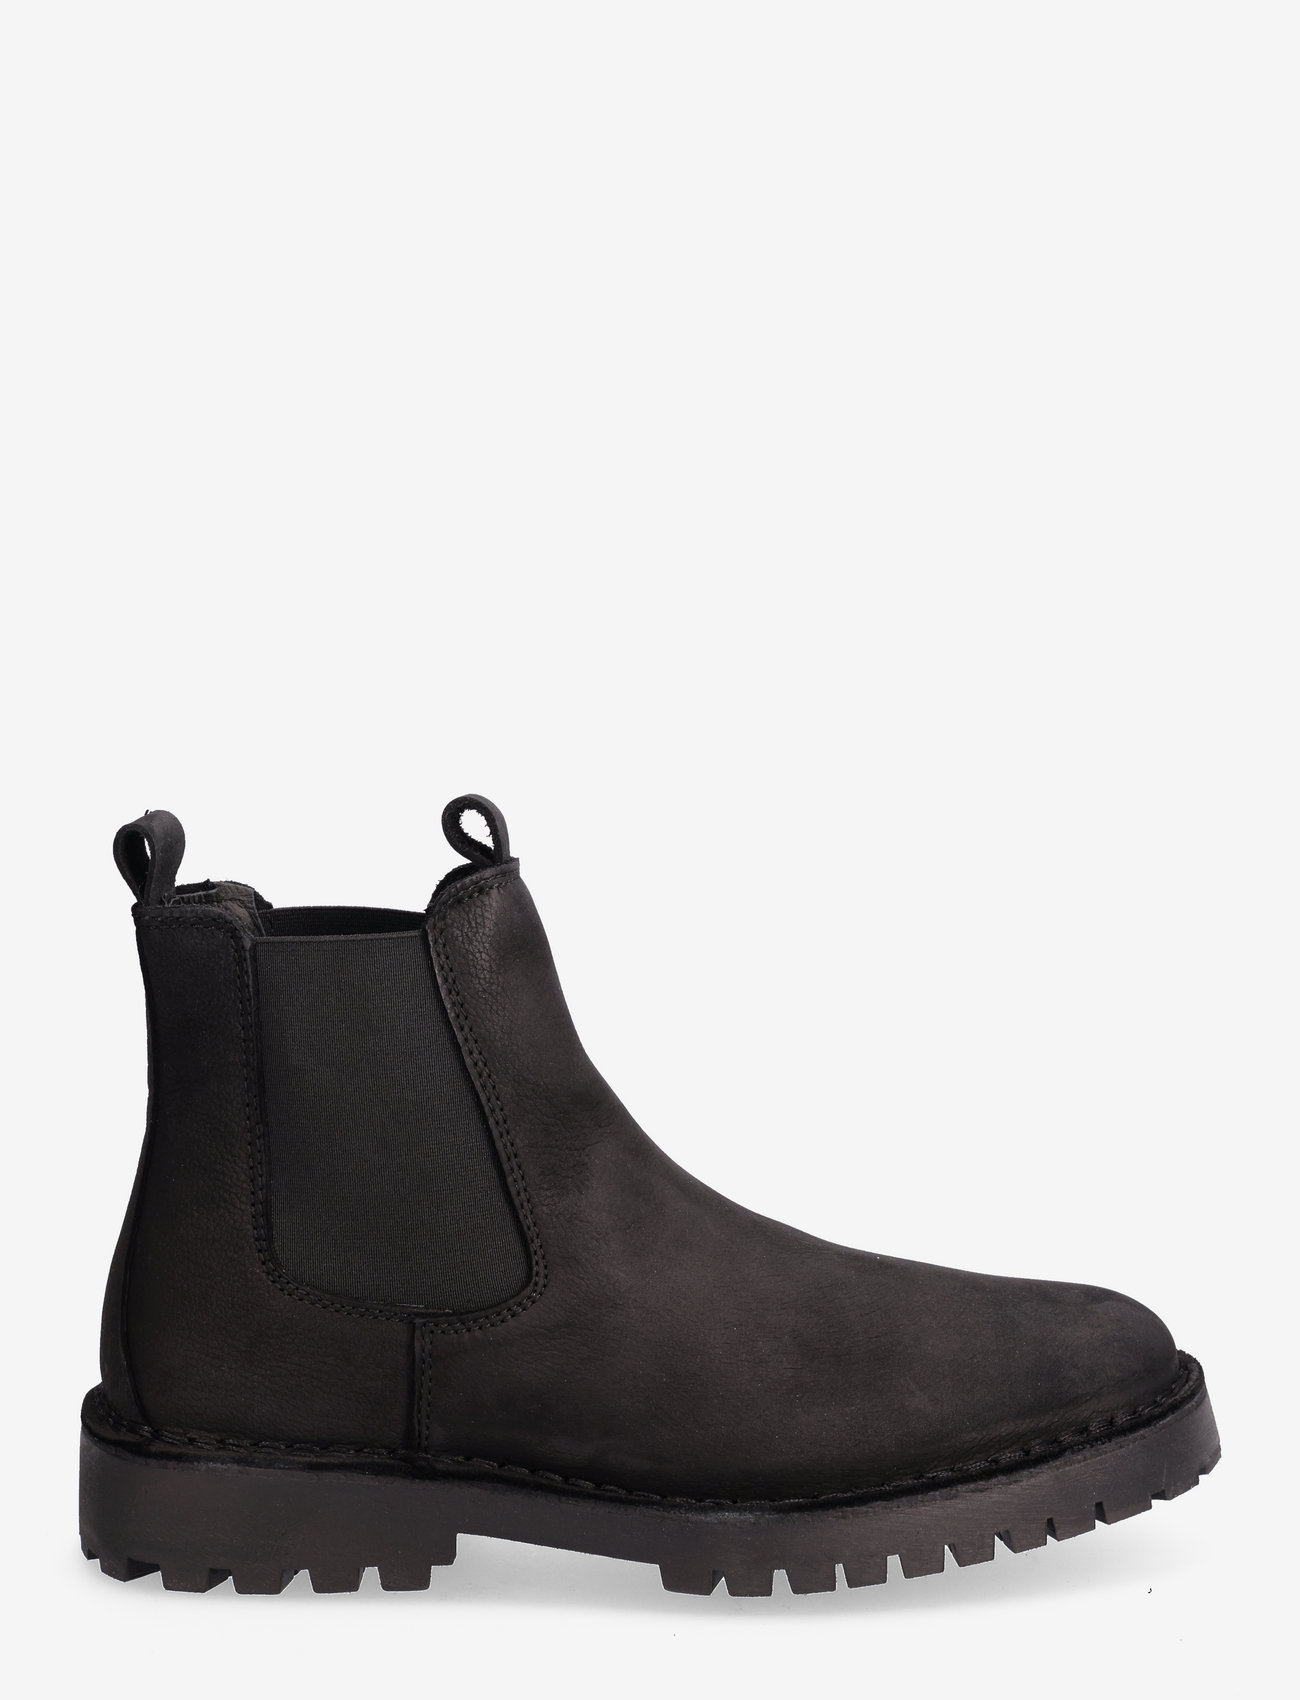 Selected Homme - SLHRICKY NUBUCK CHELSEA BOOT B - birthday gifts - black - 1